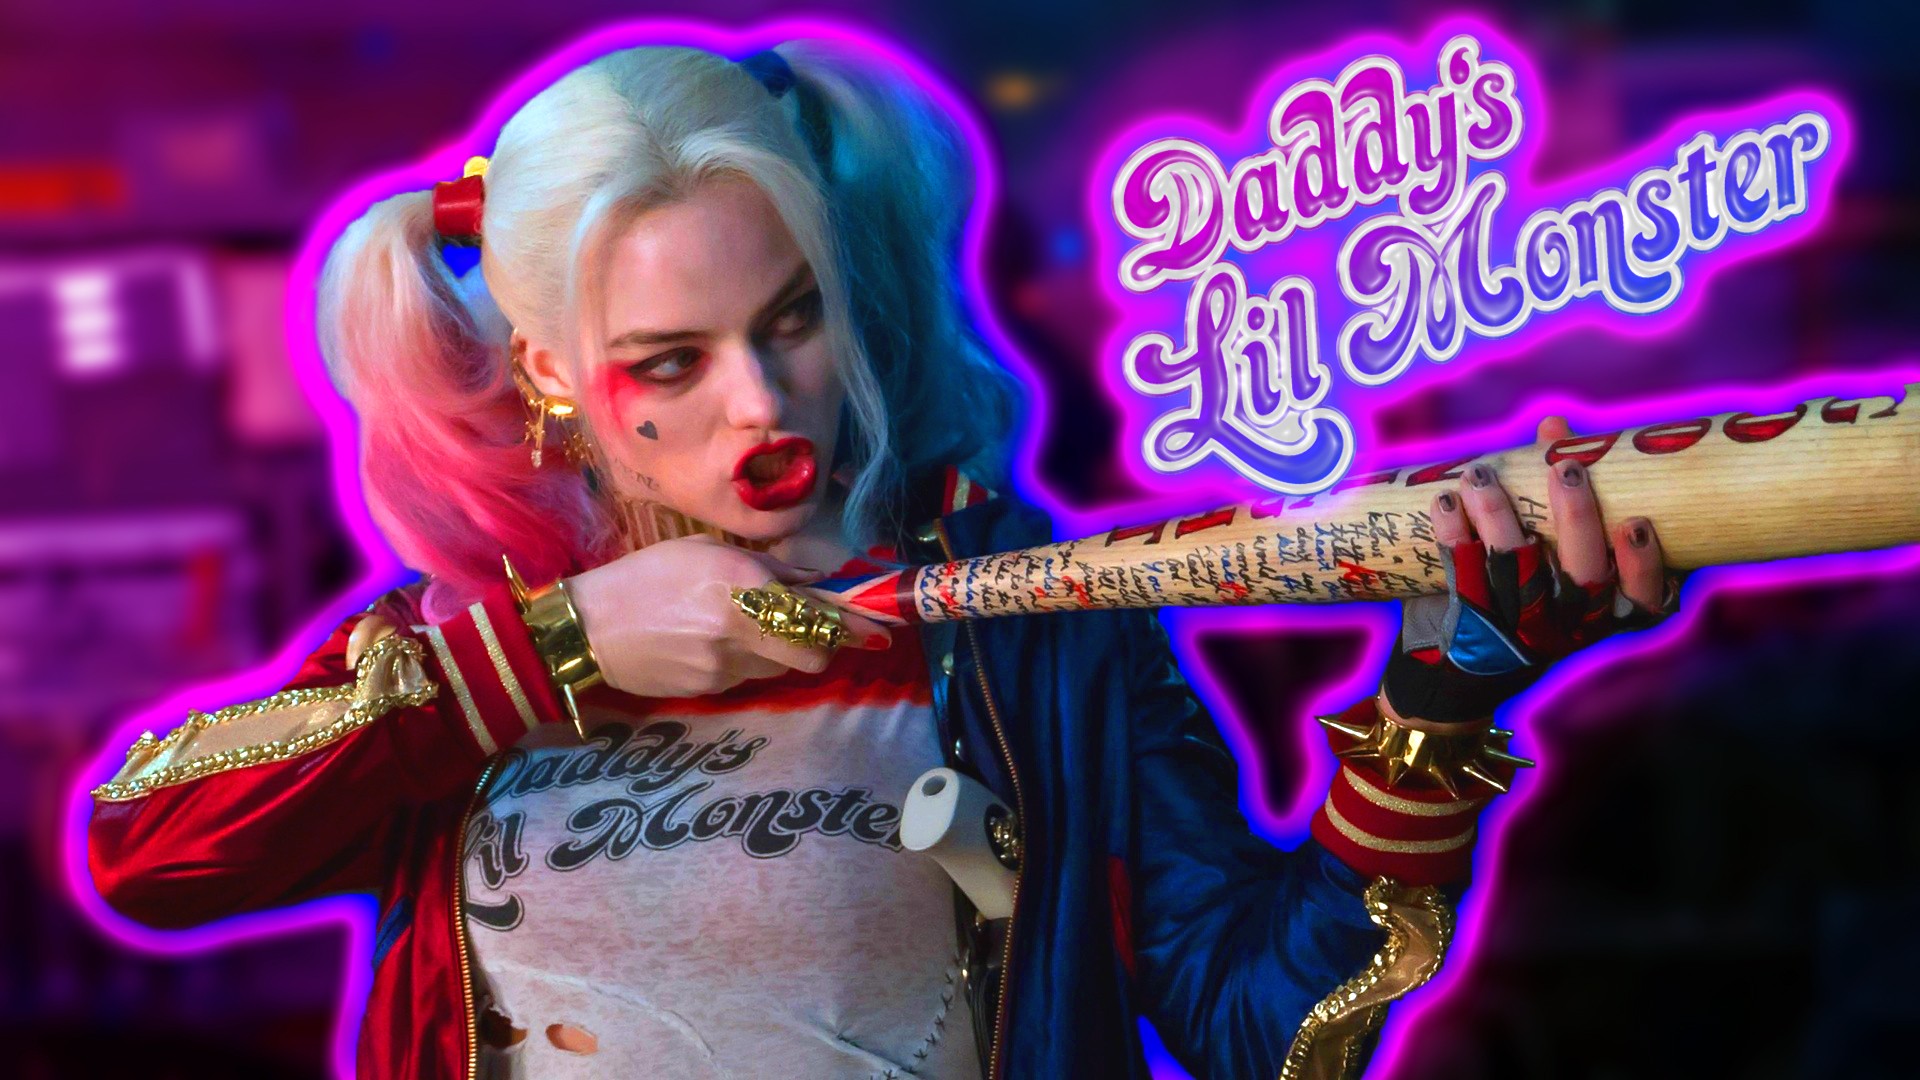 Harley Quinn Desktop Wallpaper with resolution 1920X1080 pixel. You can use this wallpaper as background for your desktop Computer Screensavers, Android or iPhone smartphones